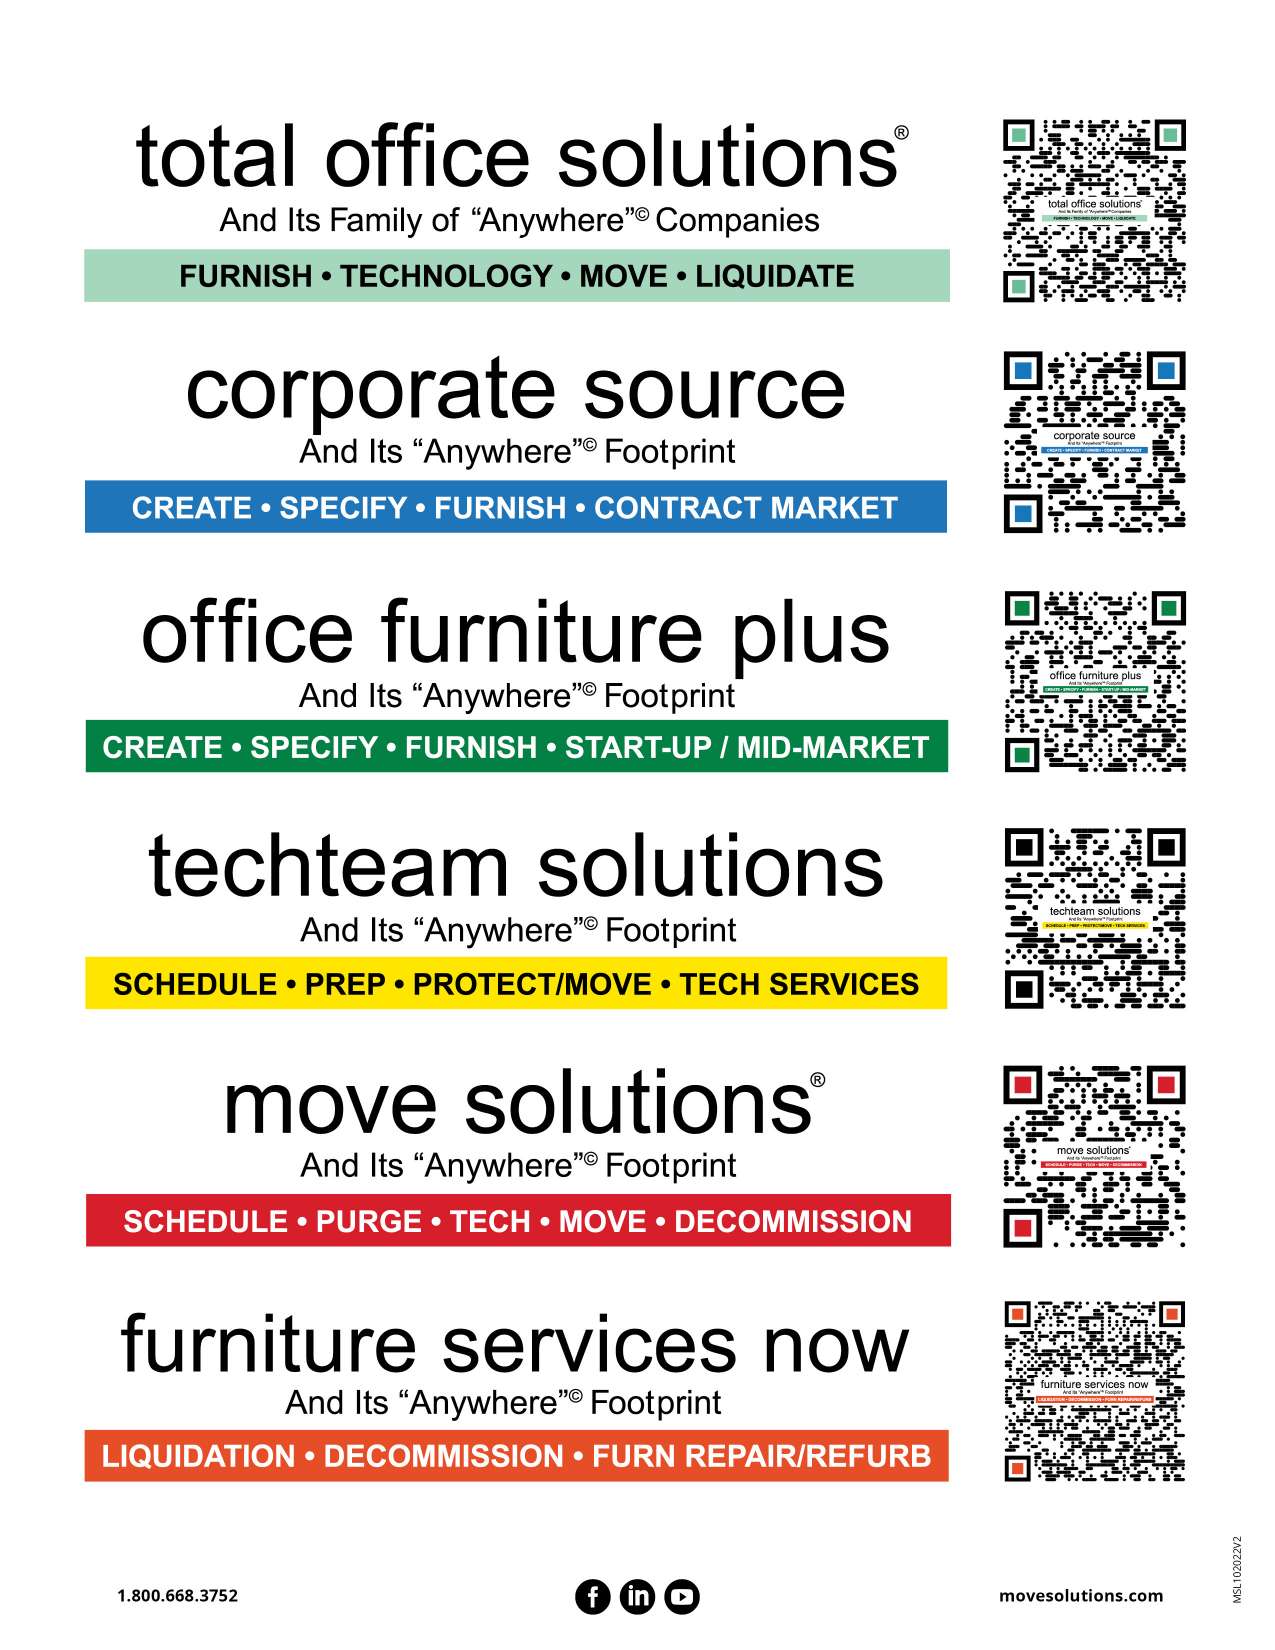 Brochure-Move-Solutions-Anywhere-Single-Pages-MSL